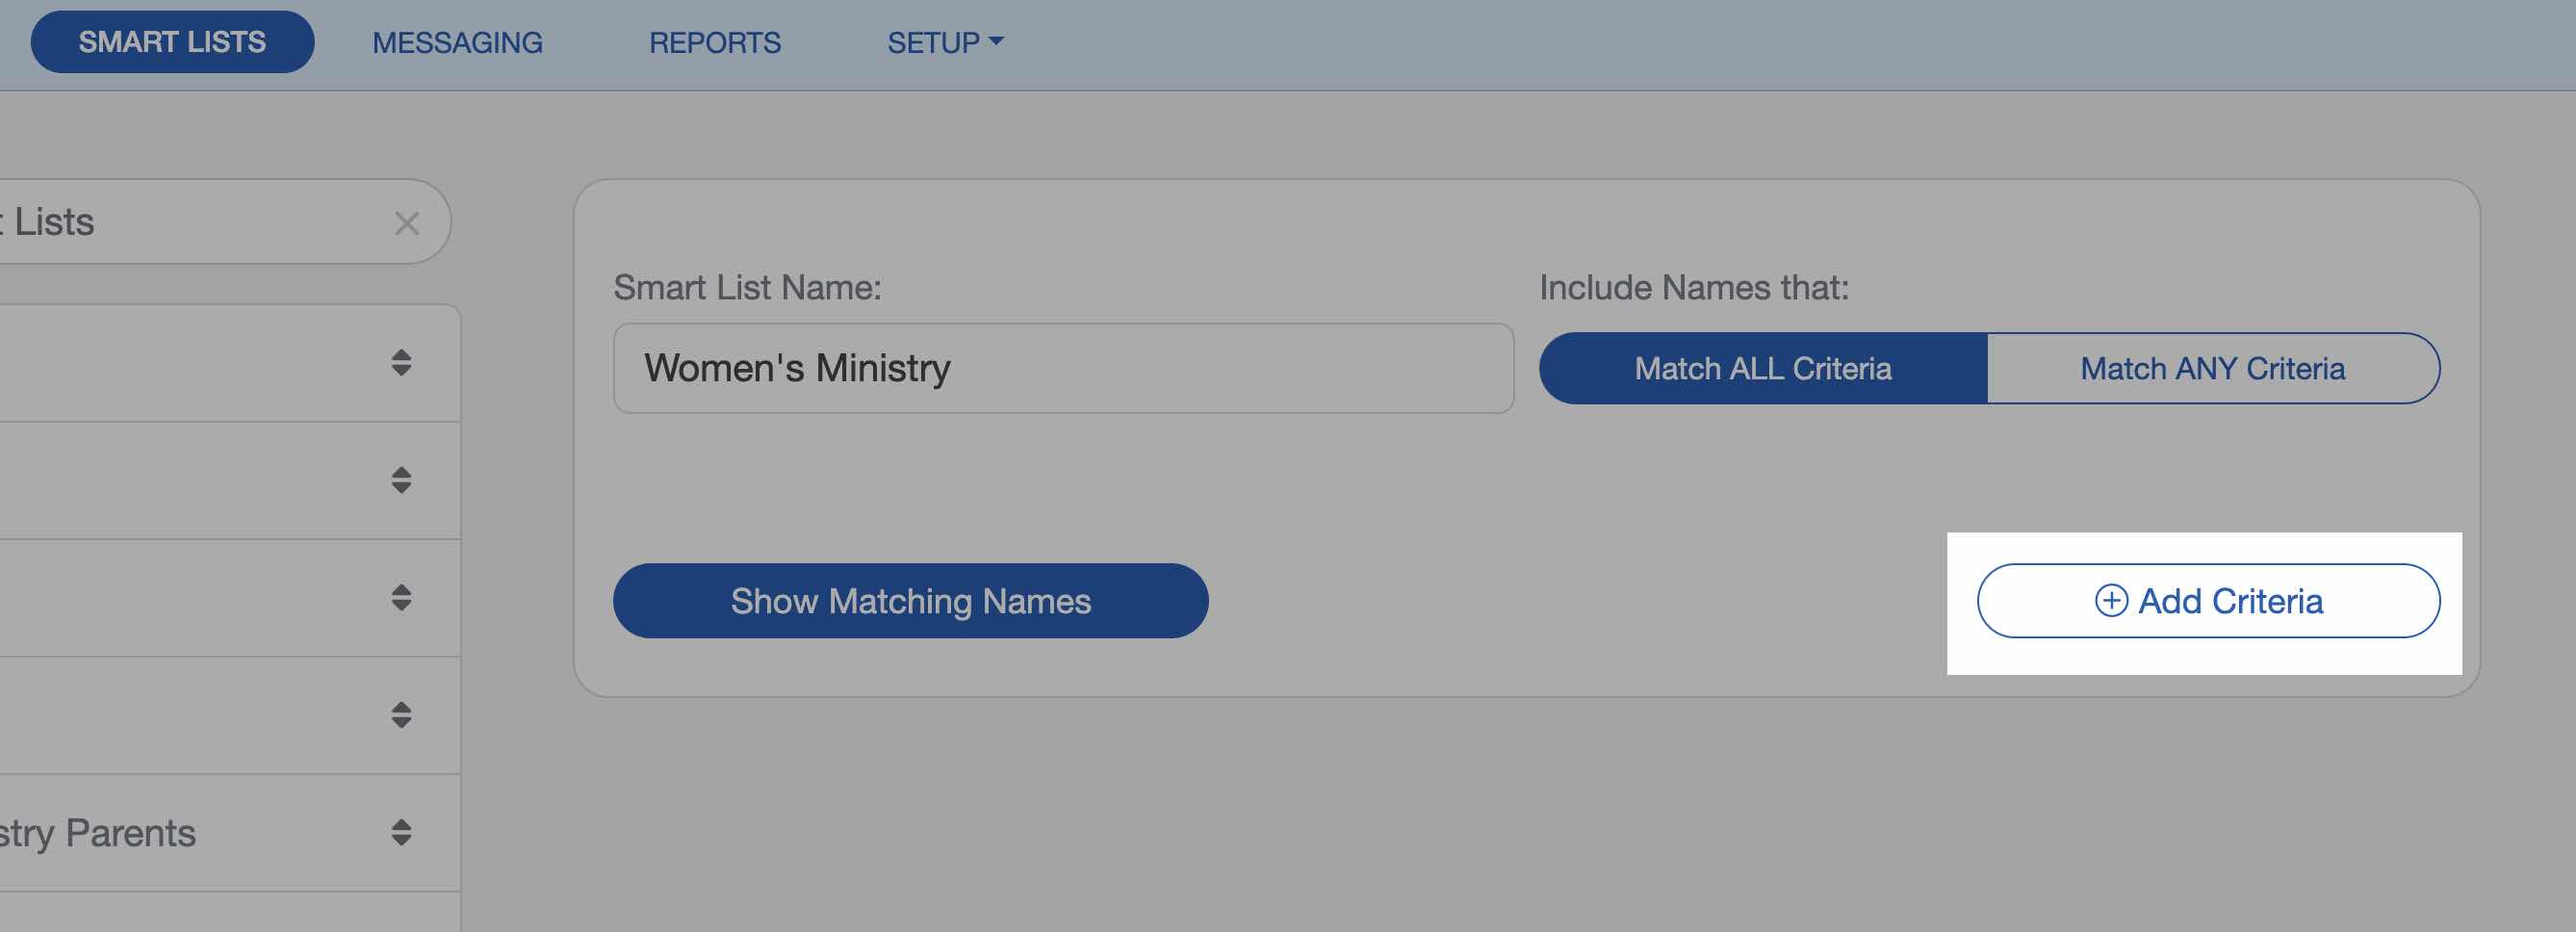 Adding criteria in the church software for your Smart List